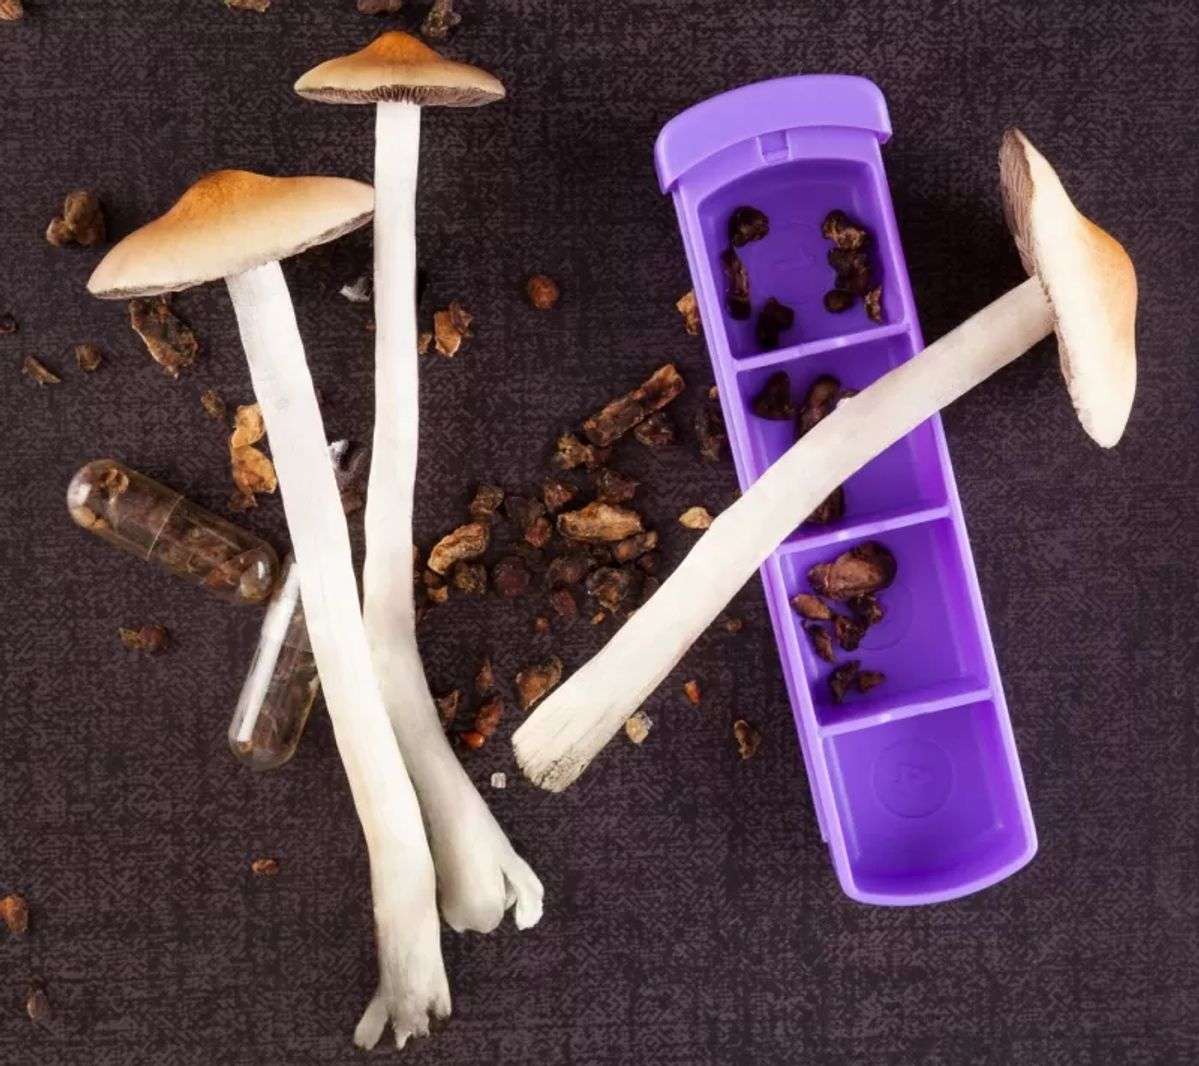 Are There Any Health Benefits to Eating Magic Mushrooms?